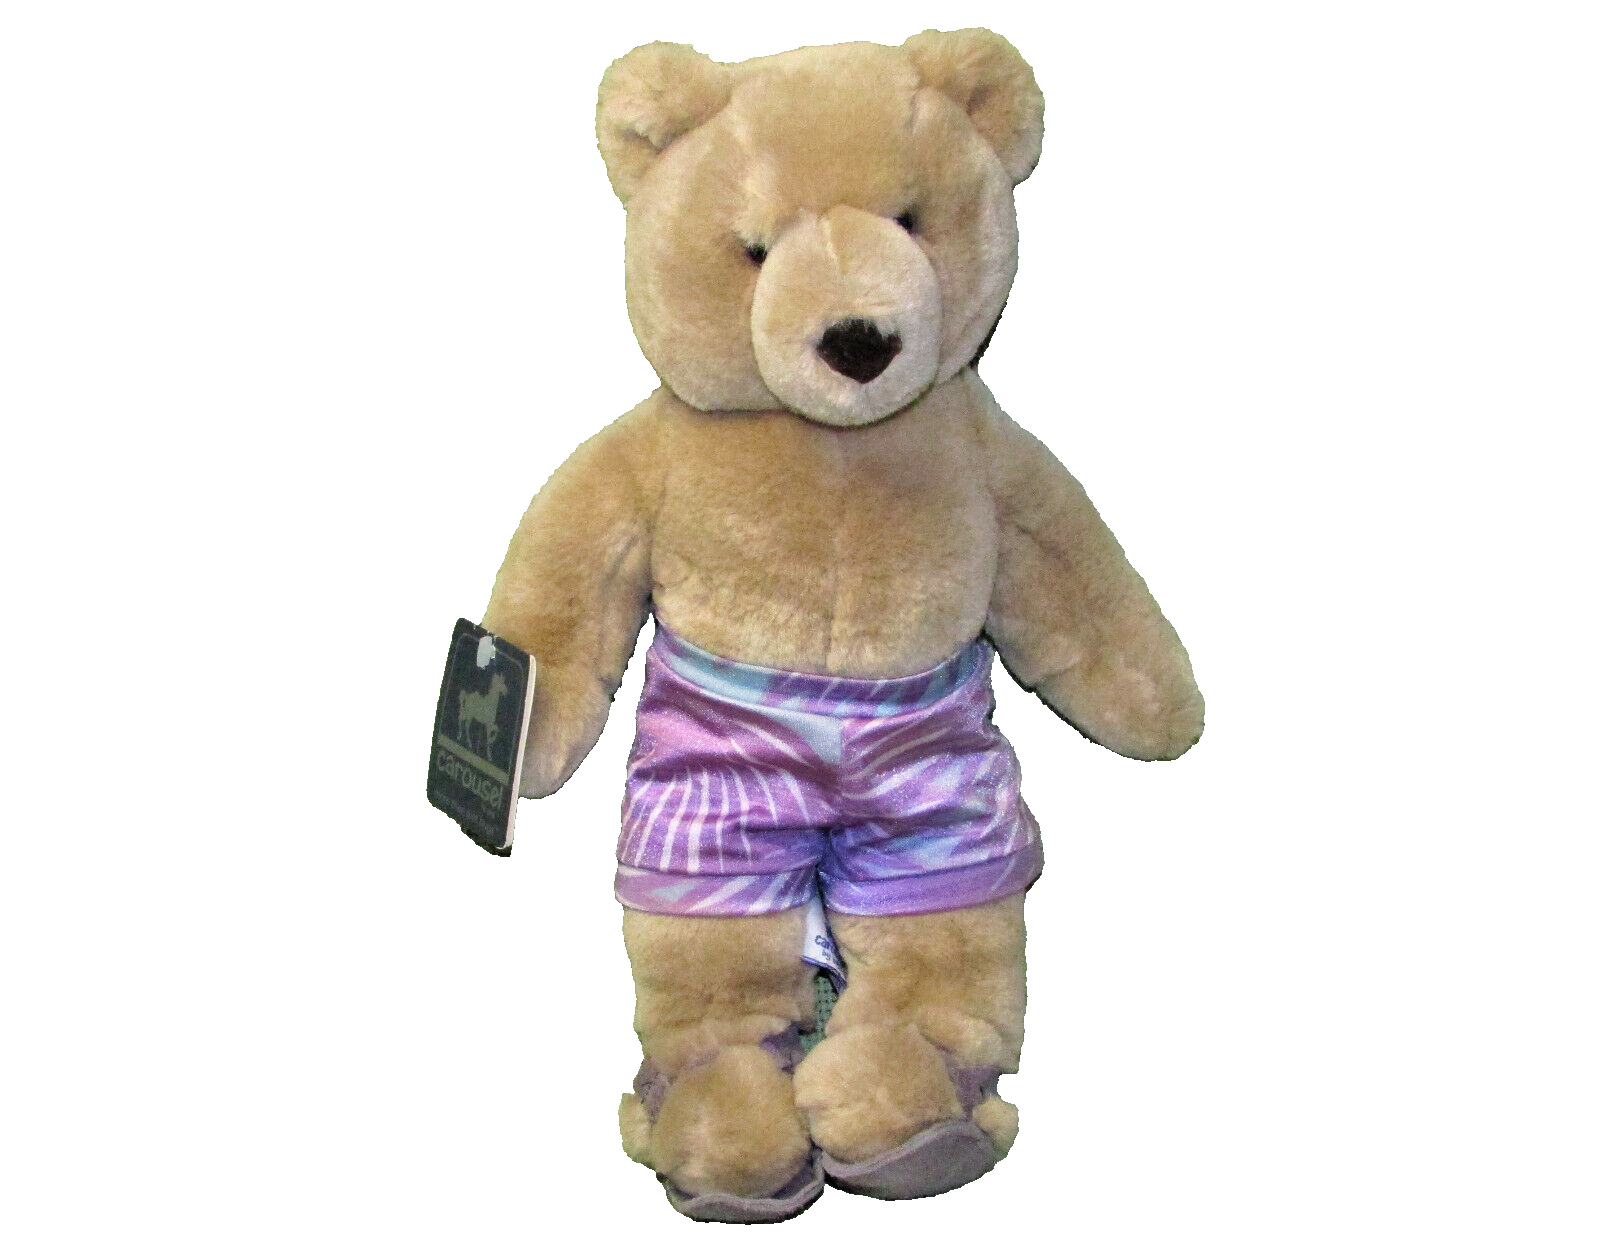 1985 CAROUSEL by GUY TEDDY FRANKIE BEAR 13" WITH HANG TAG SANDALS SHORTS VINTAGE - $26.10